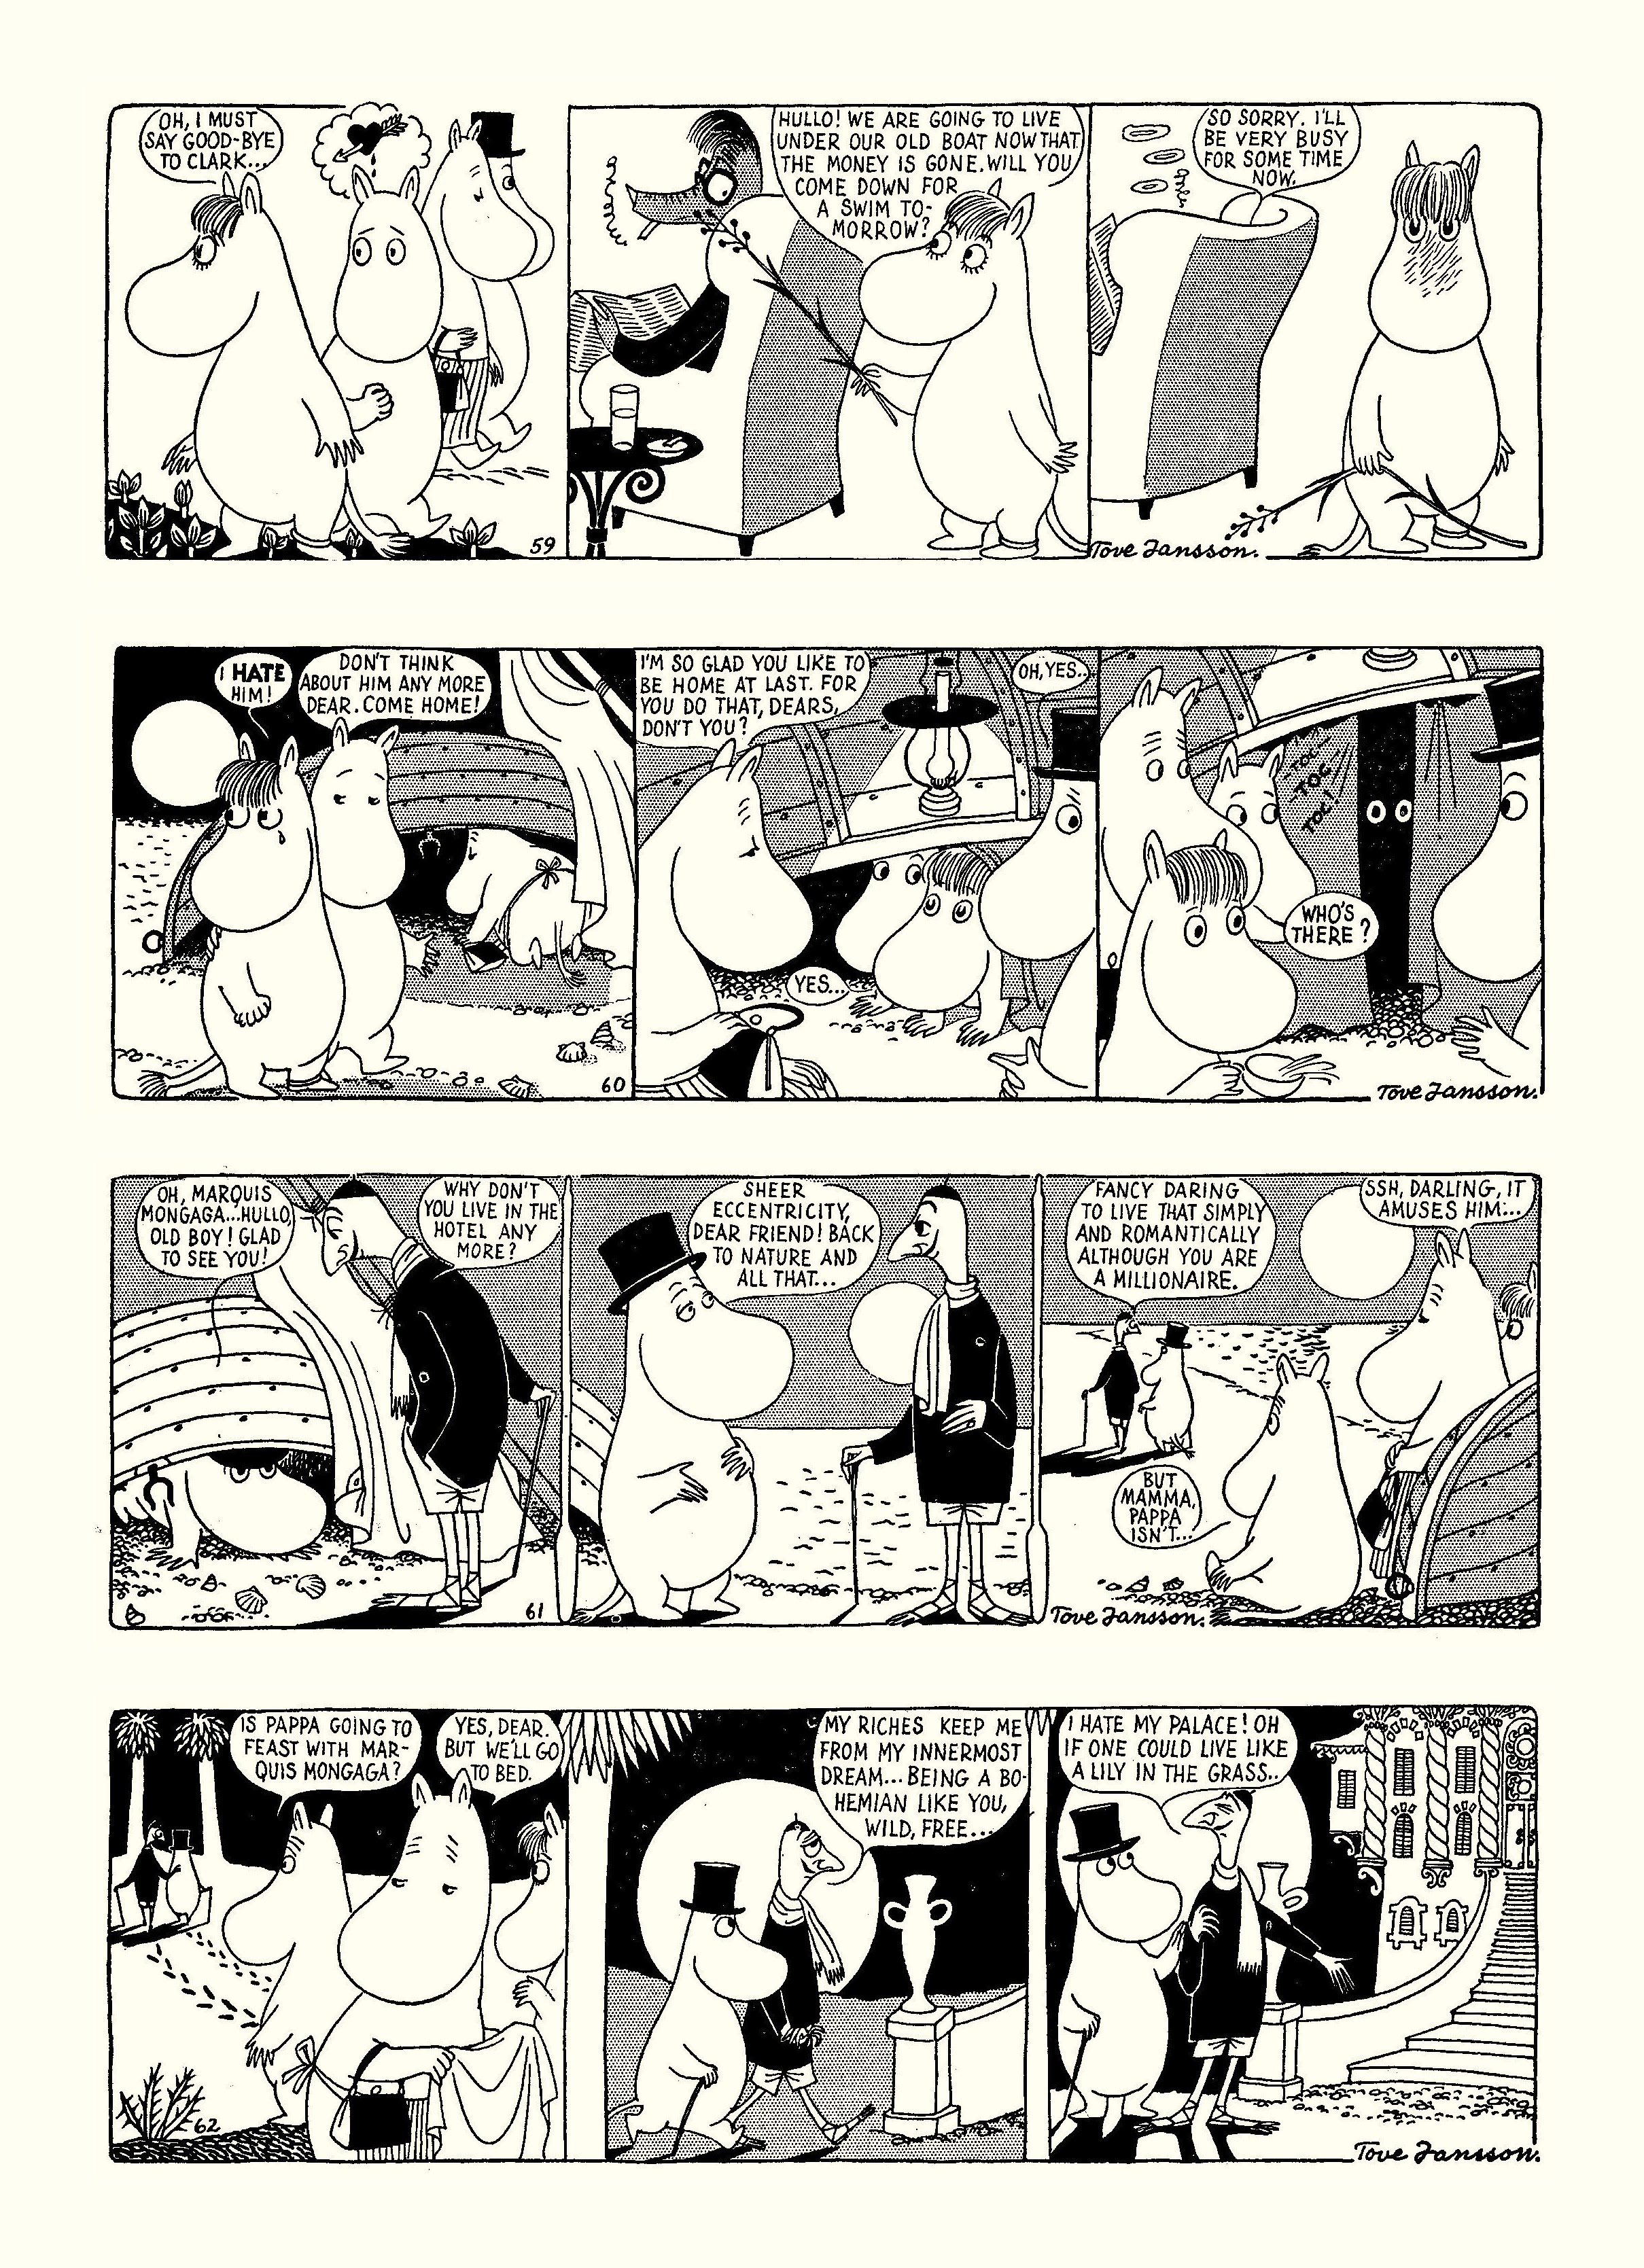 Read online Moomin: The Complete Tove Jansson Comic Strip comic -  Issue # TPB 1 - 63